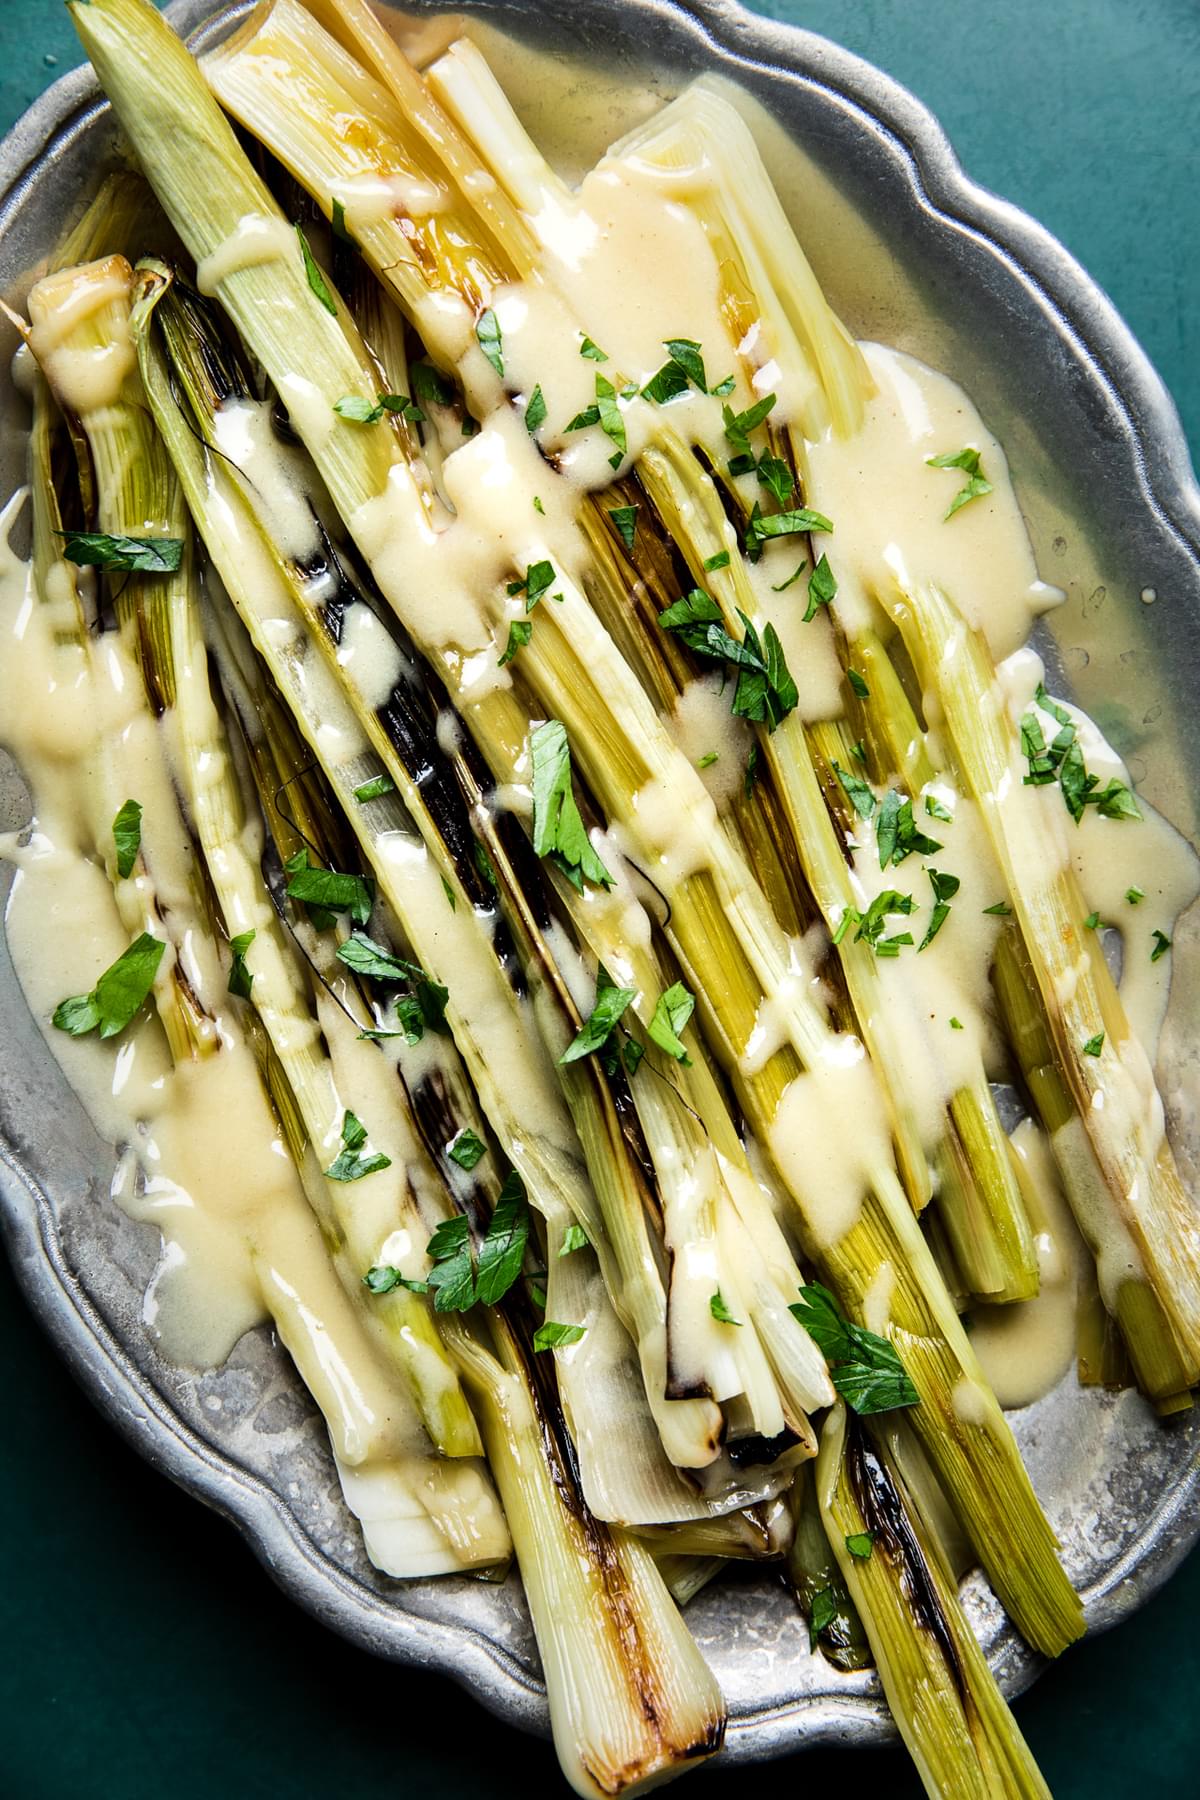 Braised Leeks with Beurre Blanc (French Butter Sauce) on a serving platter